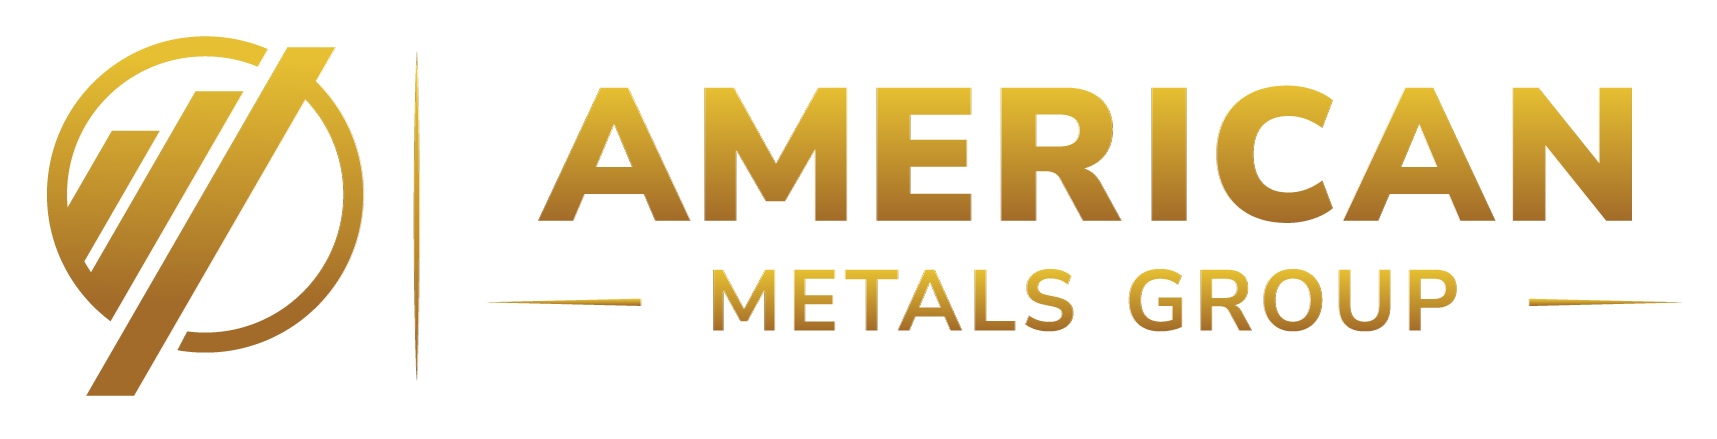 American Metals Group | Gold and Silver Numismatics